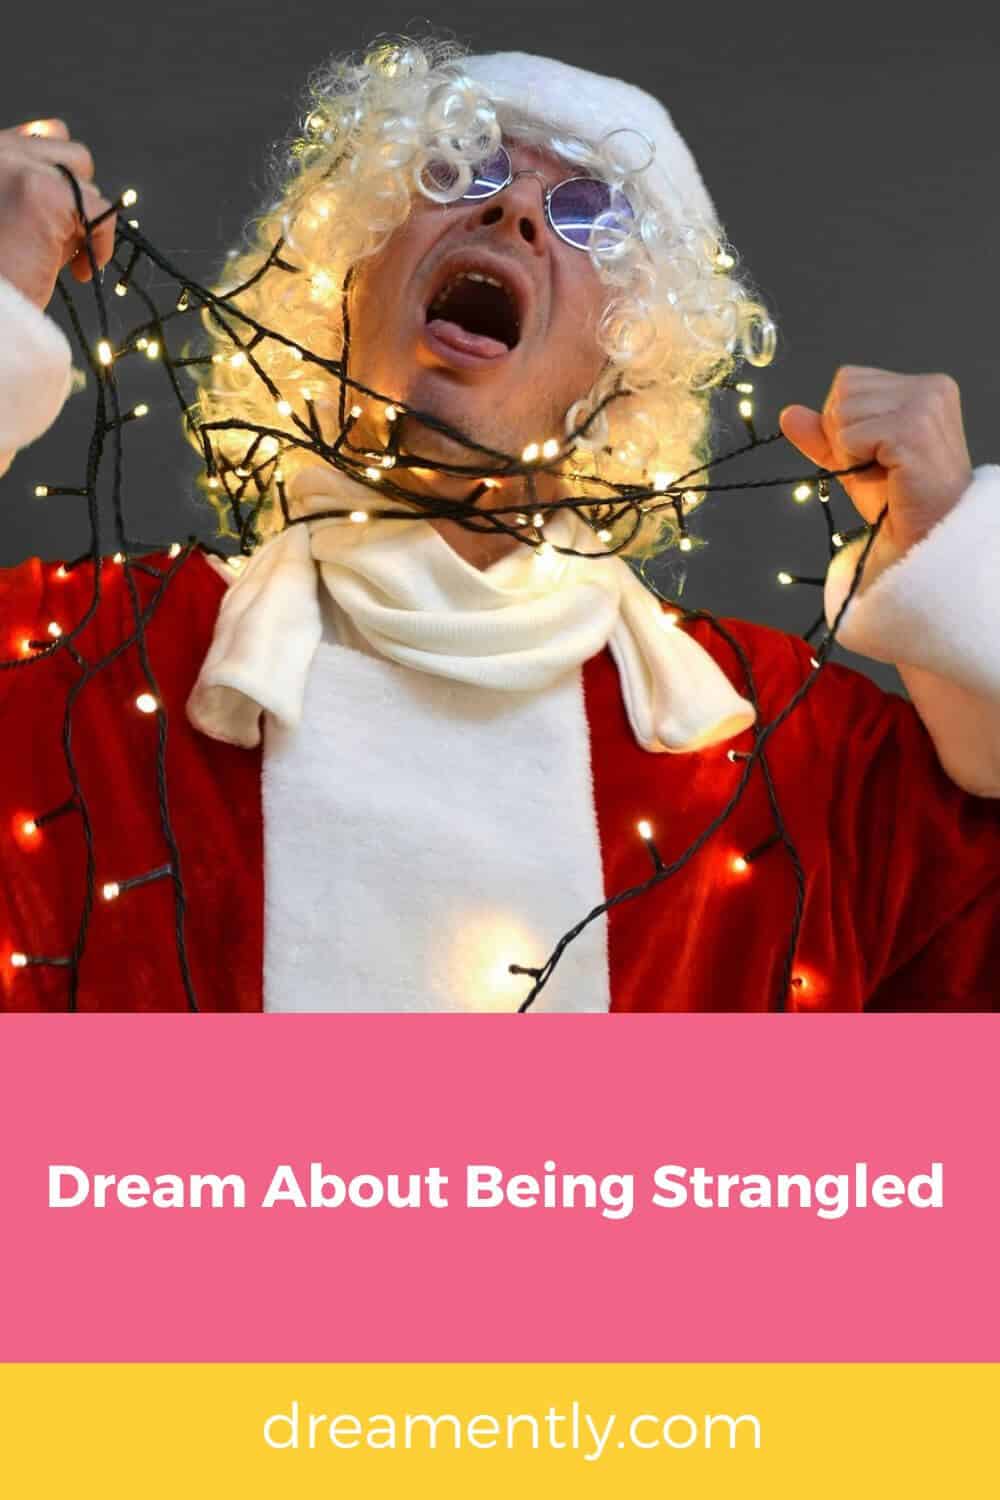 Dream About Being Strangled (2)